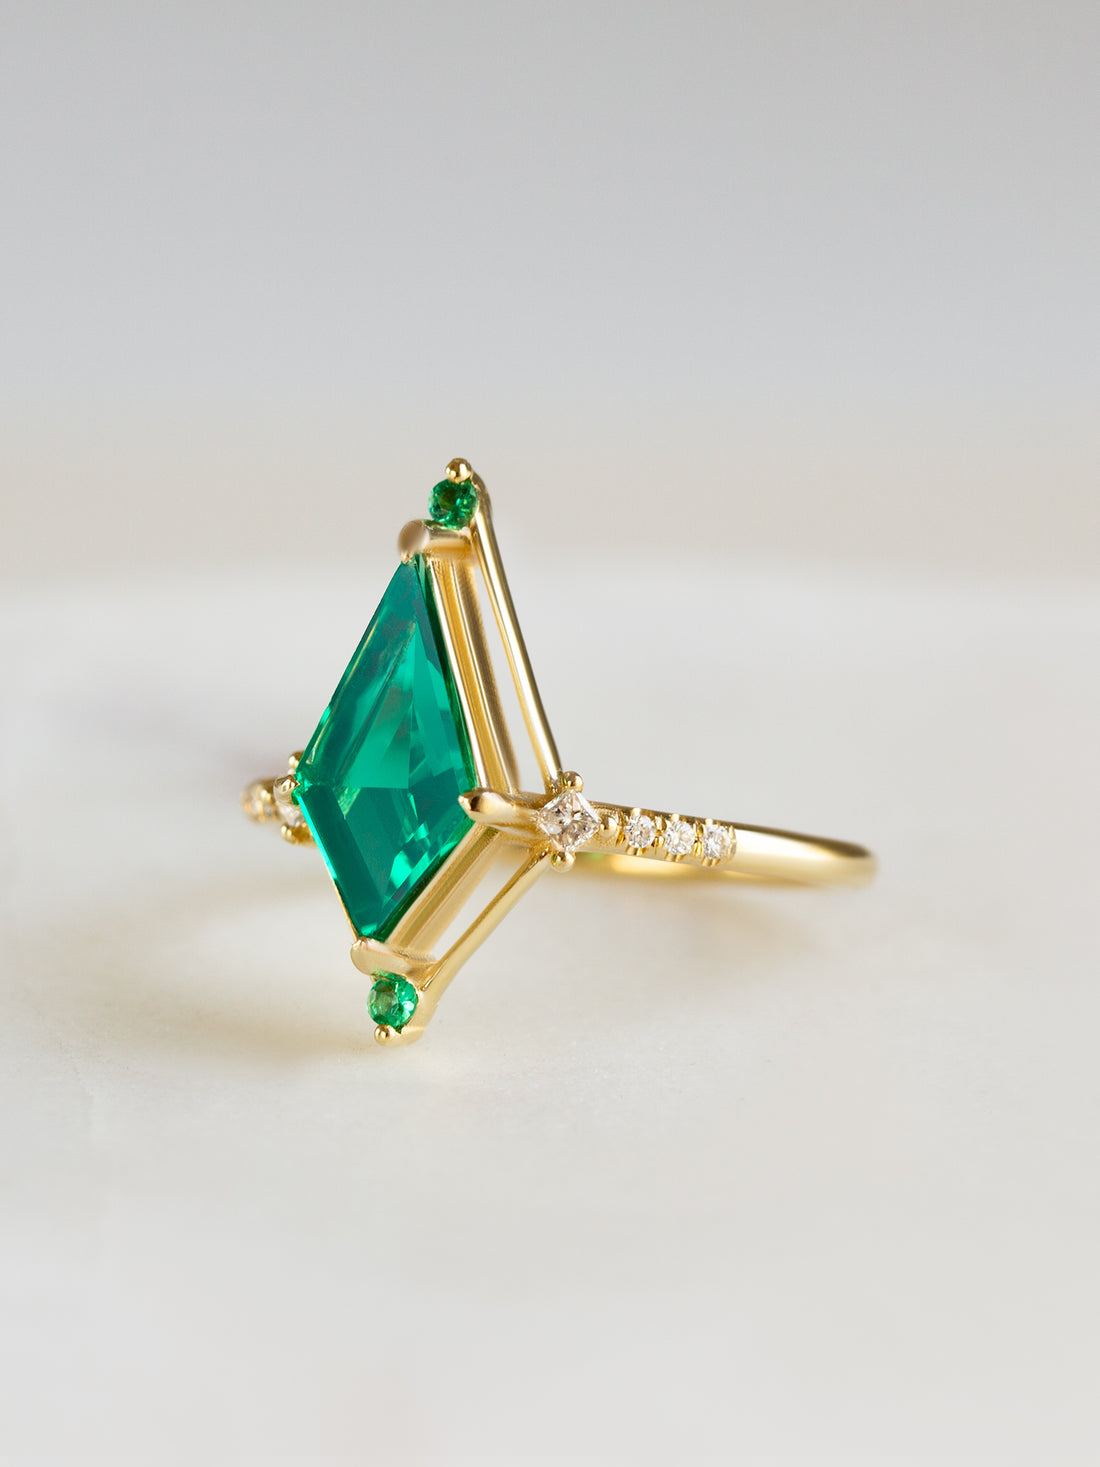 hiddenspace-engagement-ring-emerald-dawn-ring-proposal-unique-finejewelry4